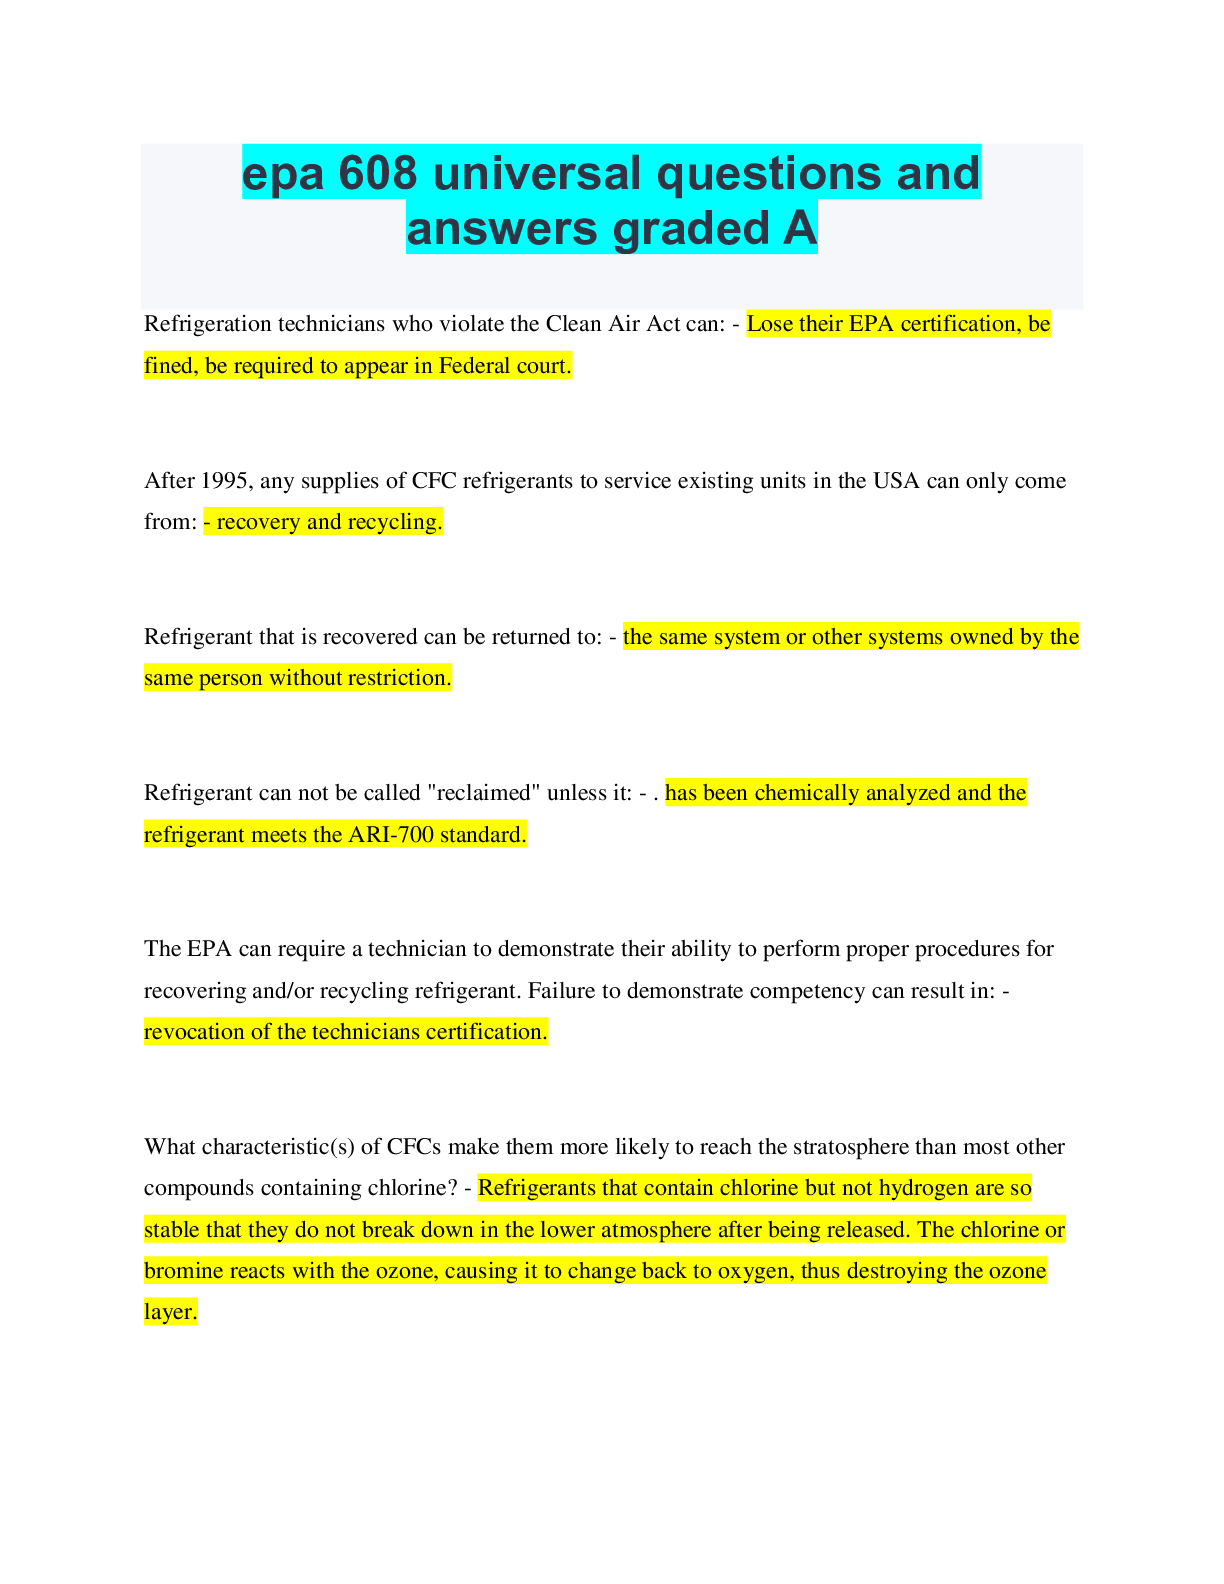 epa 608 universal questions and answers graded A Browsegrades